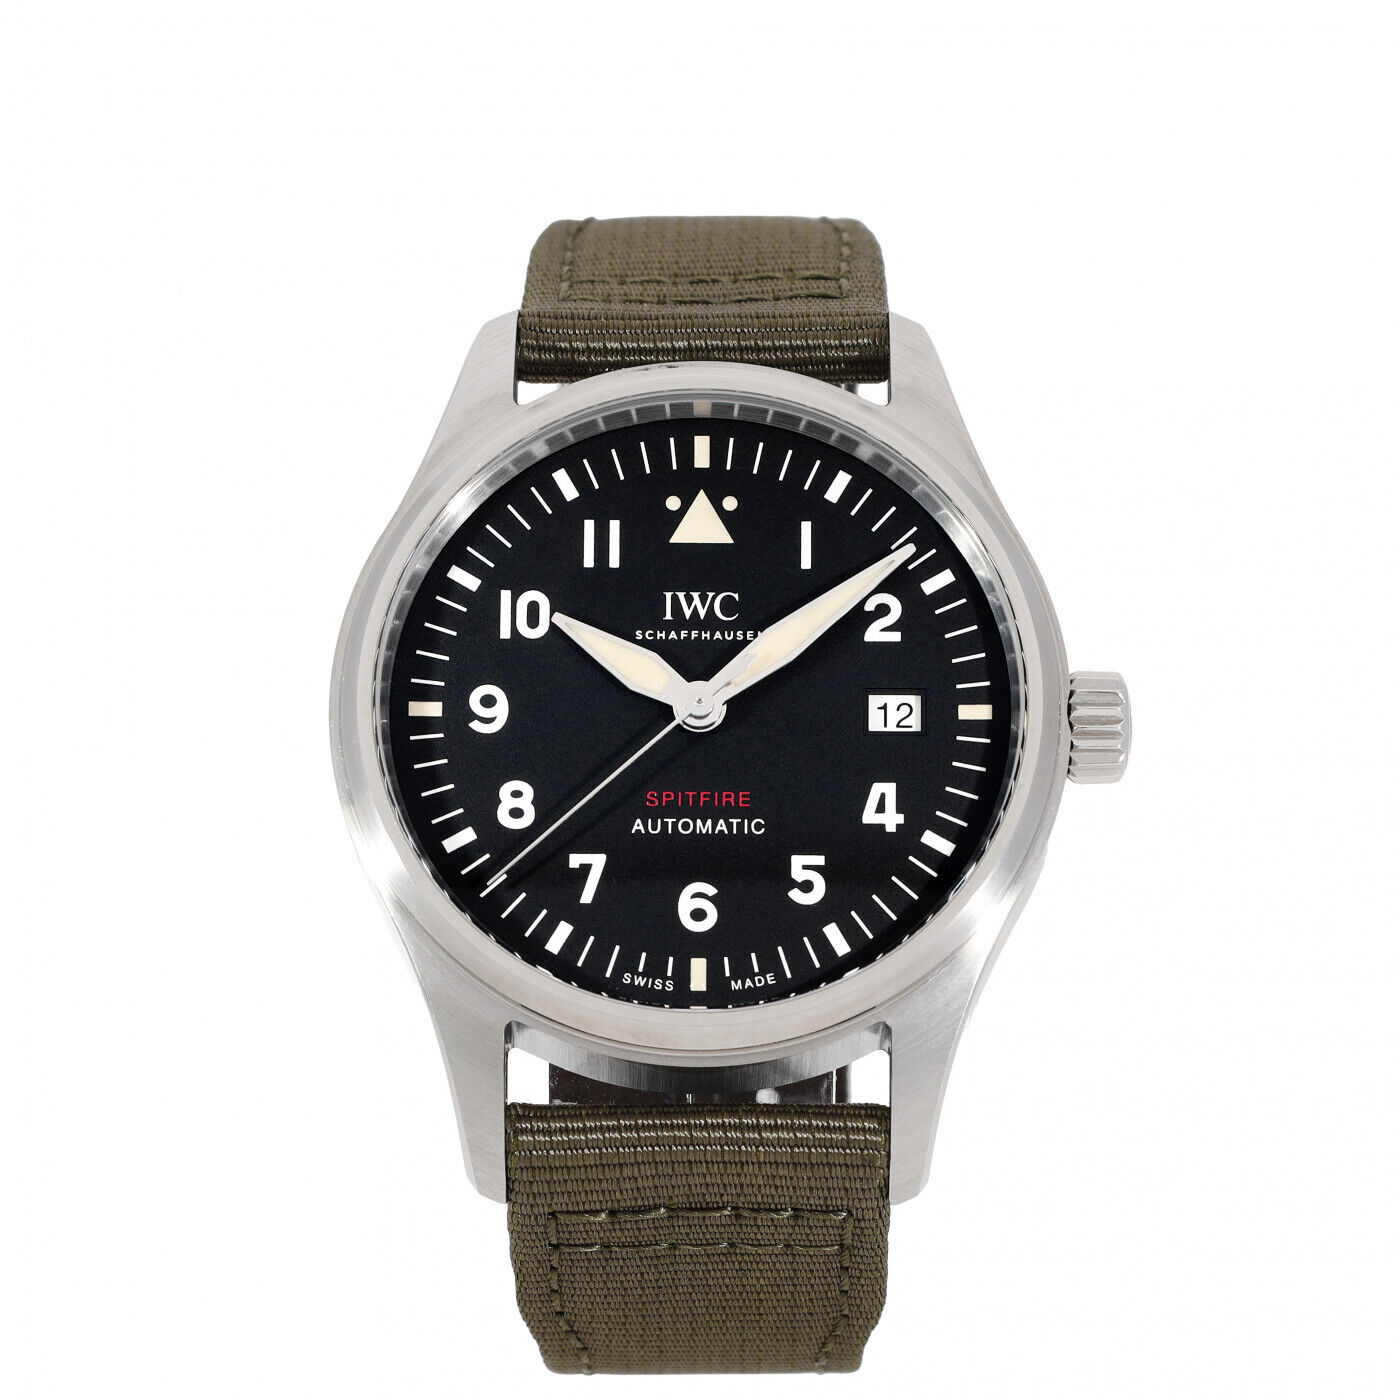 New IWC Pilots Watch Spitfire Stainless Steel Automatic 39 mm Watch IW326805